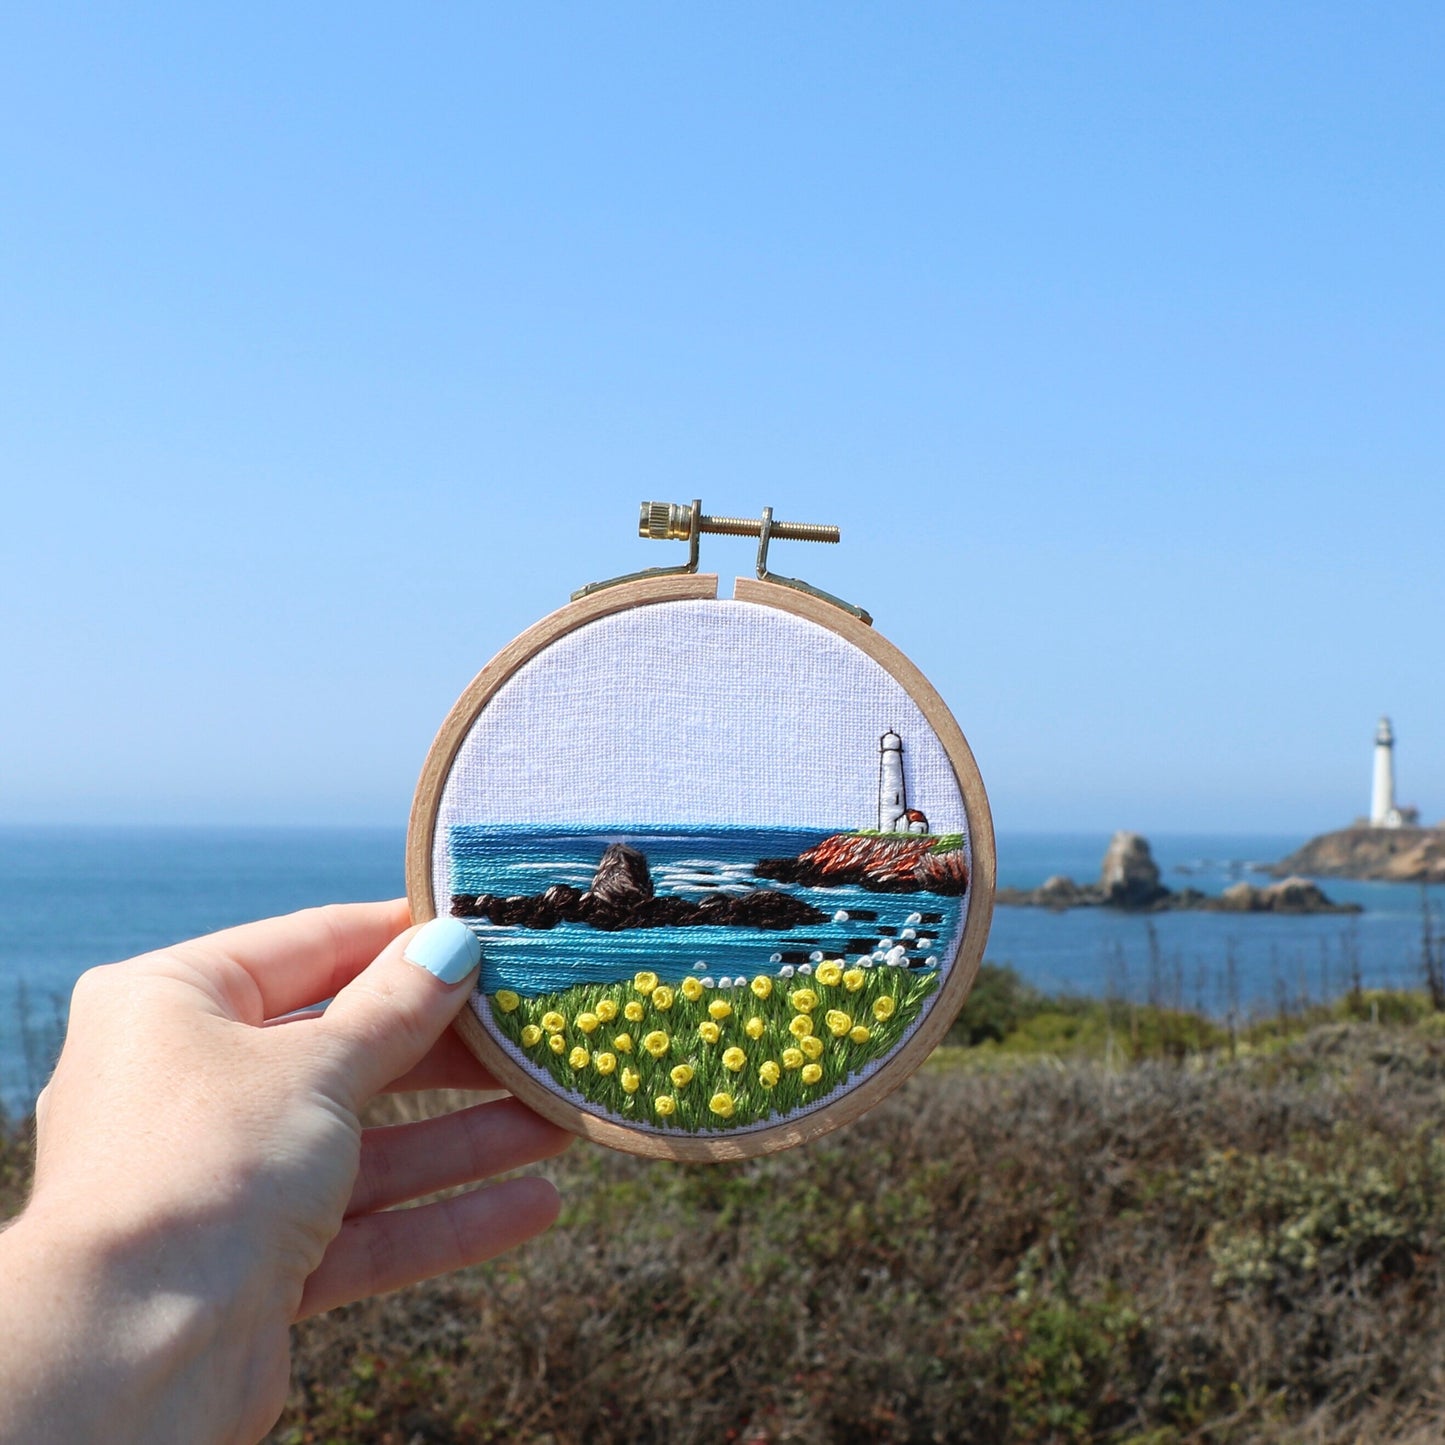 Lighthouse by the Bay: Beginner Embroidery Kit